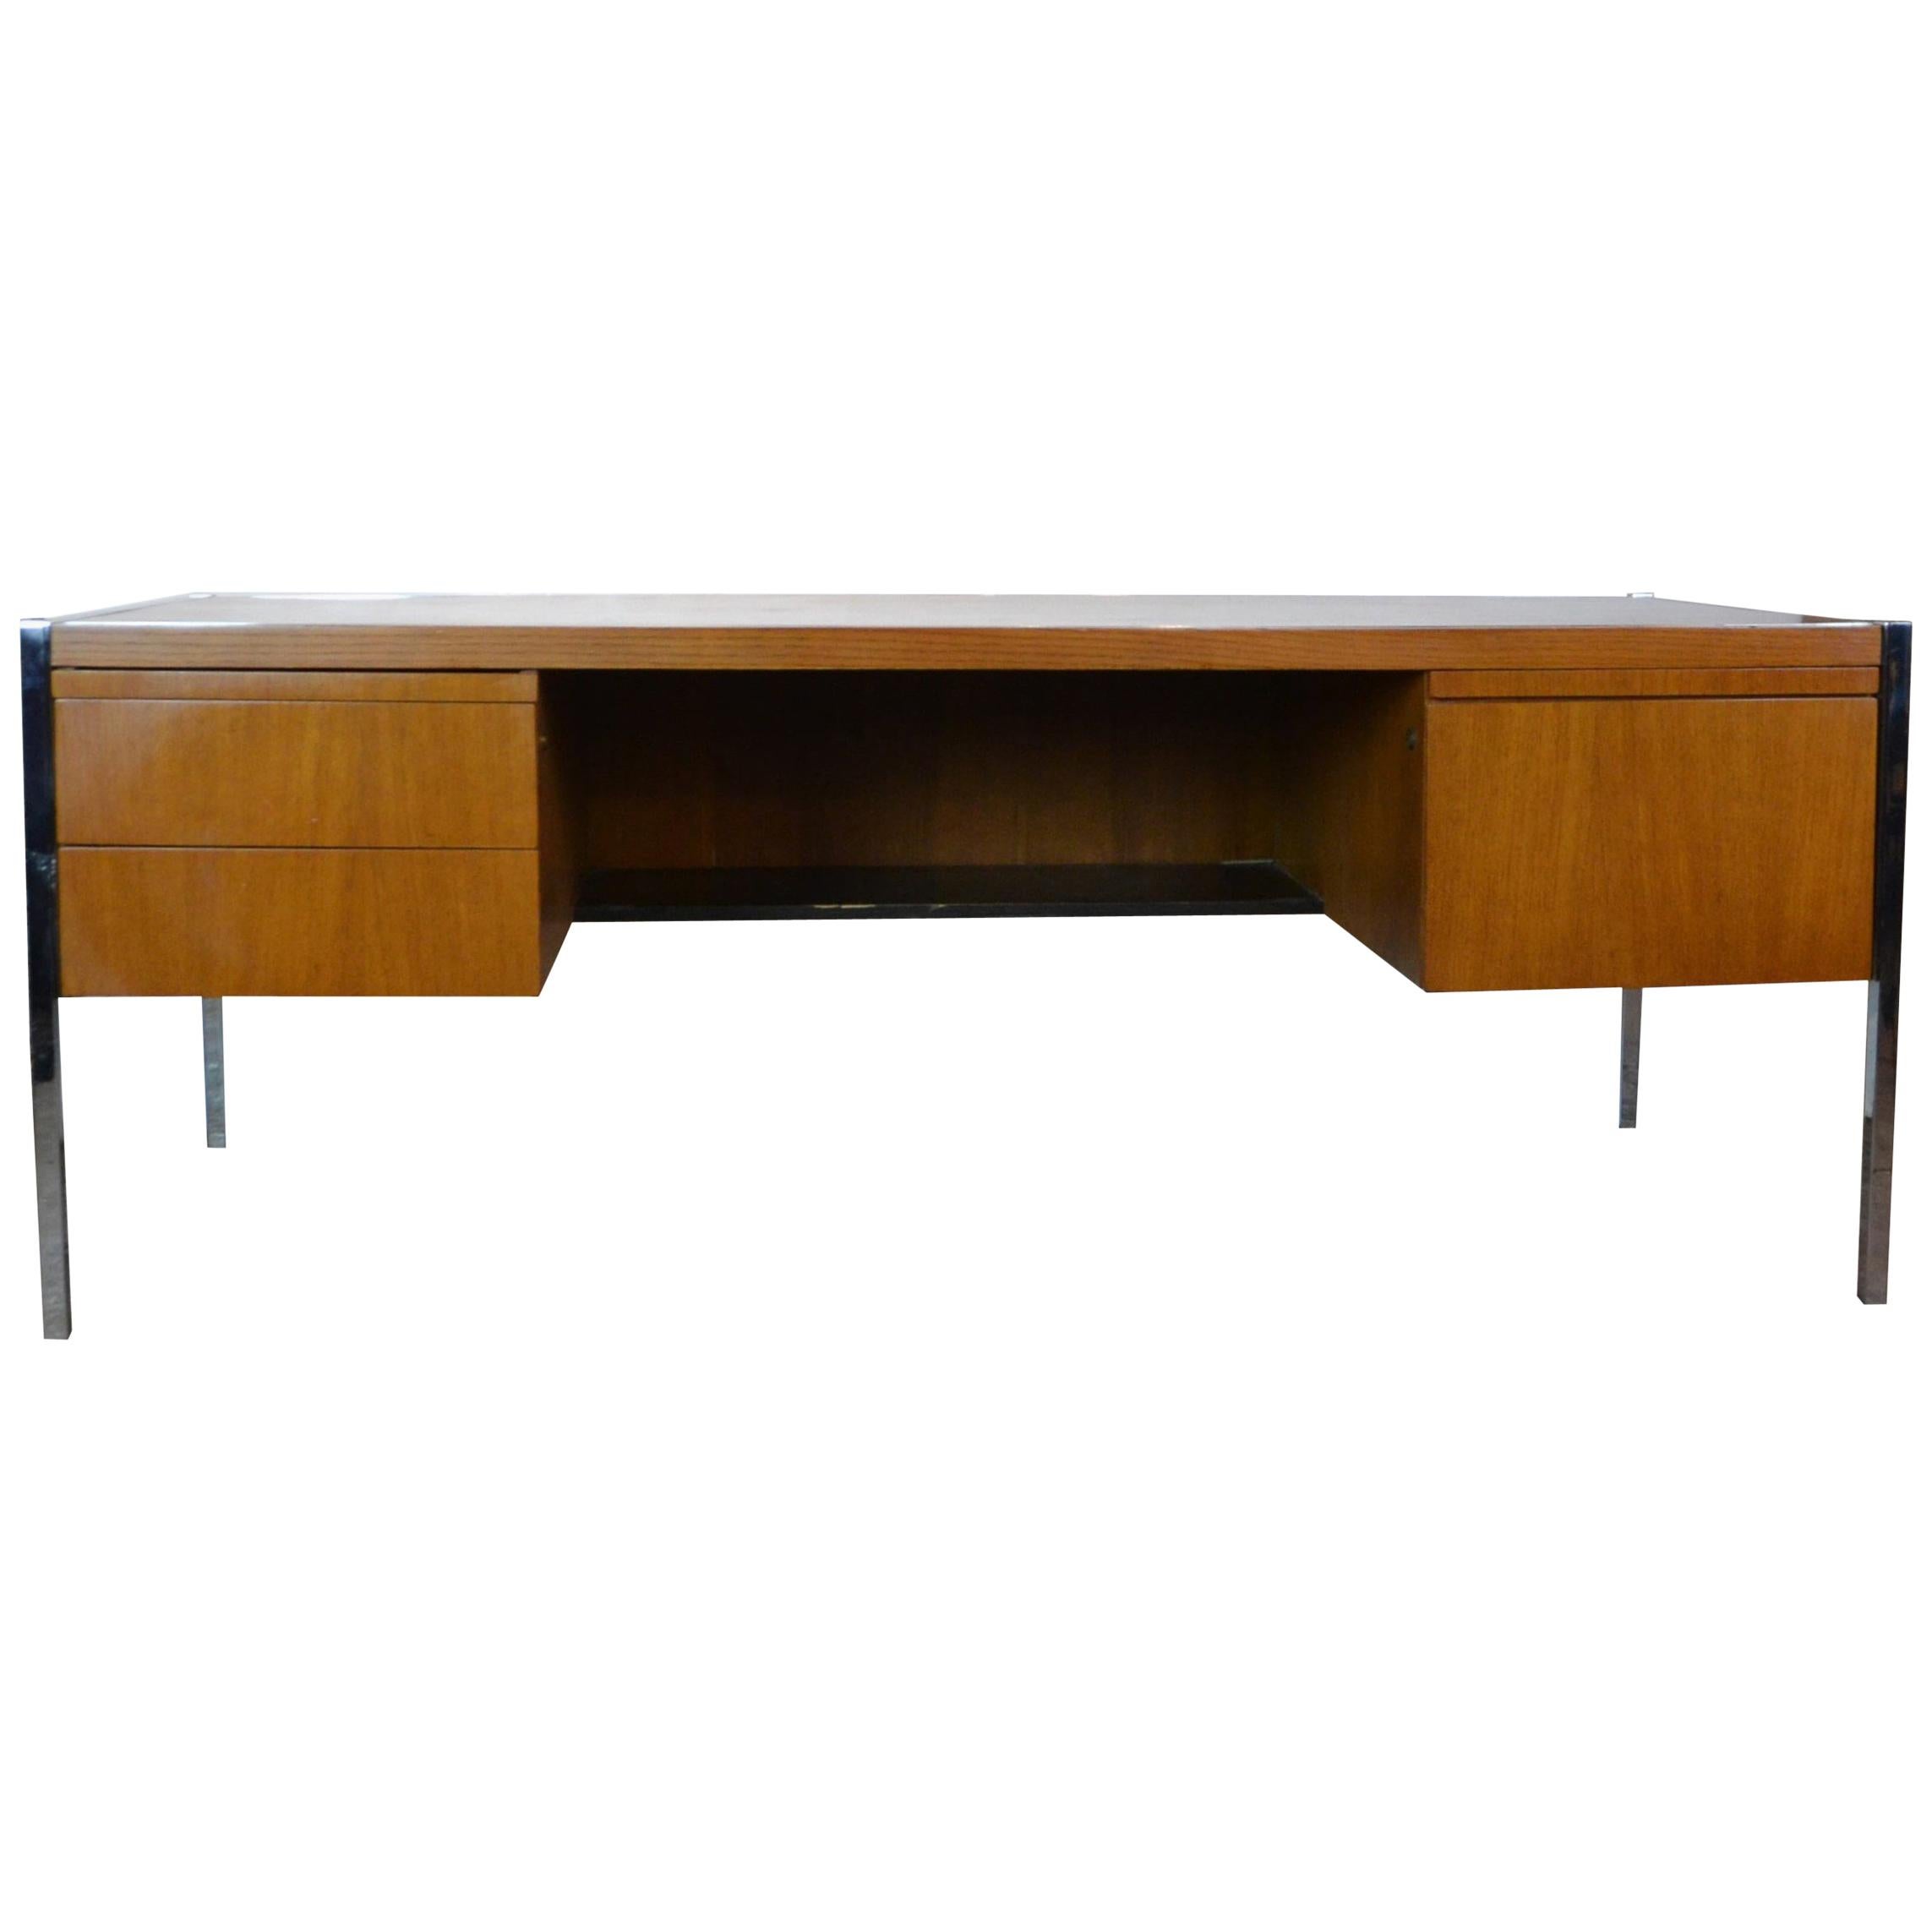 Executive Style Desk By Knoll At 1stdibs